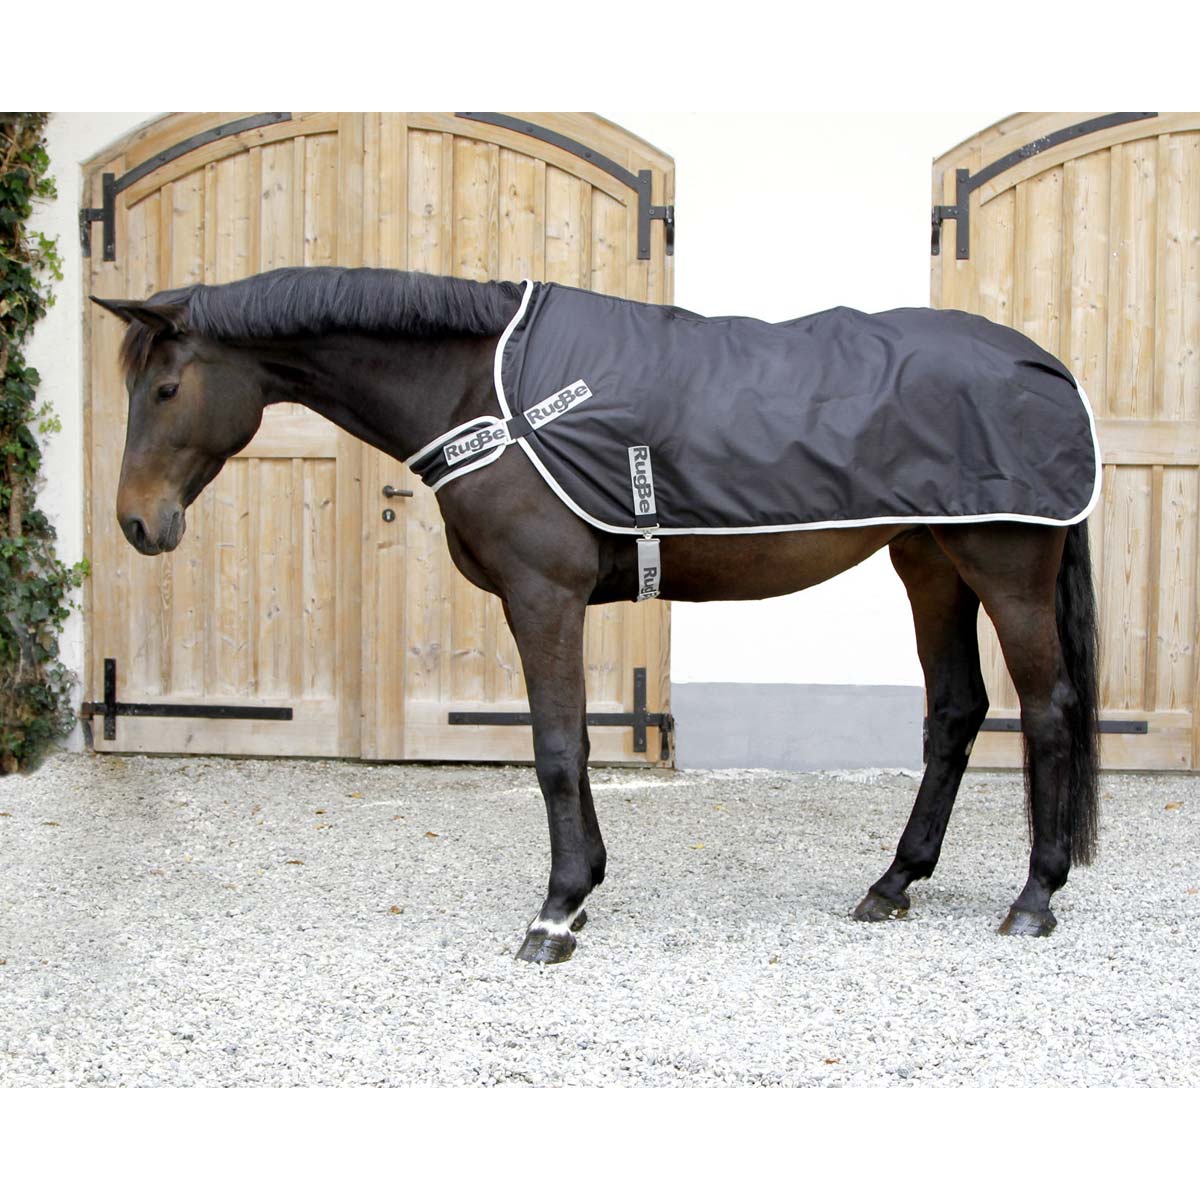 Covalliero RugBe Exercise Rug 600D